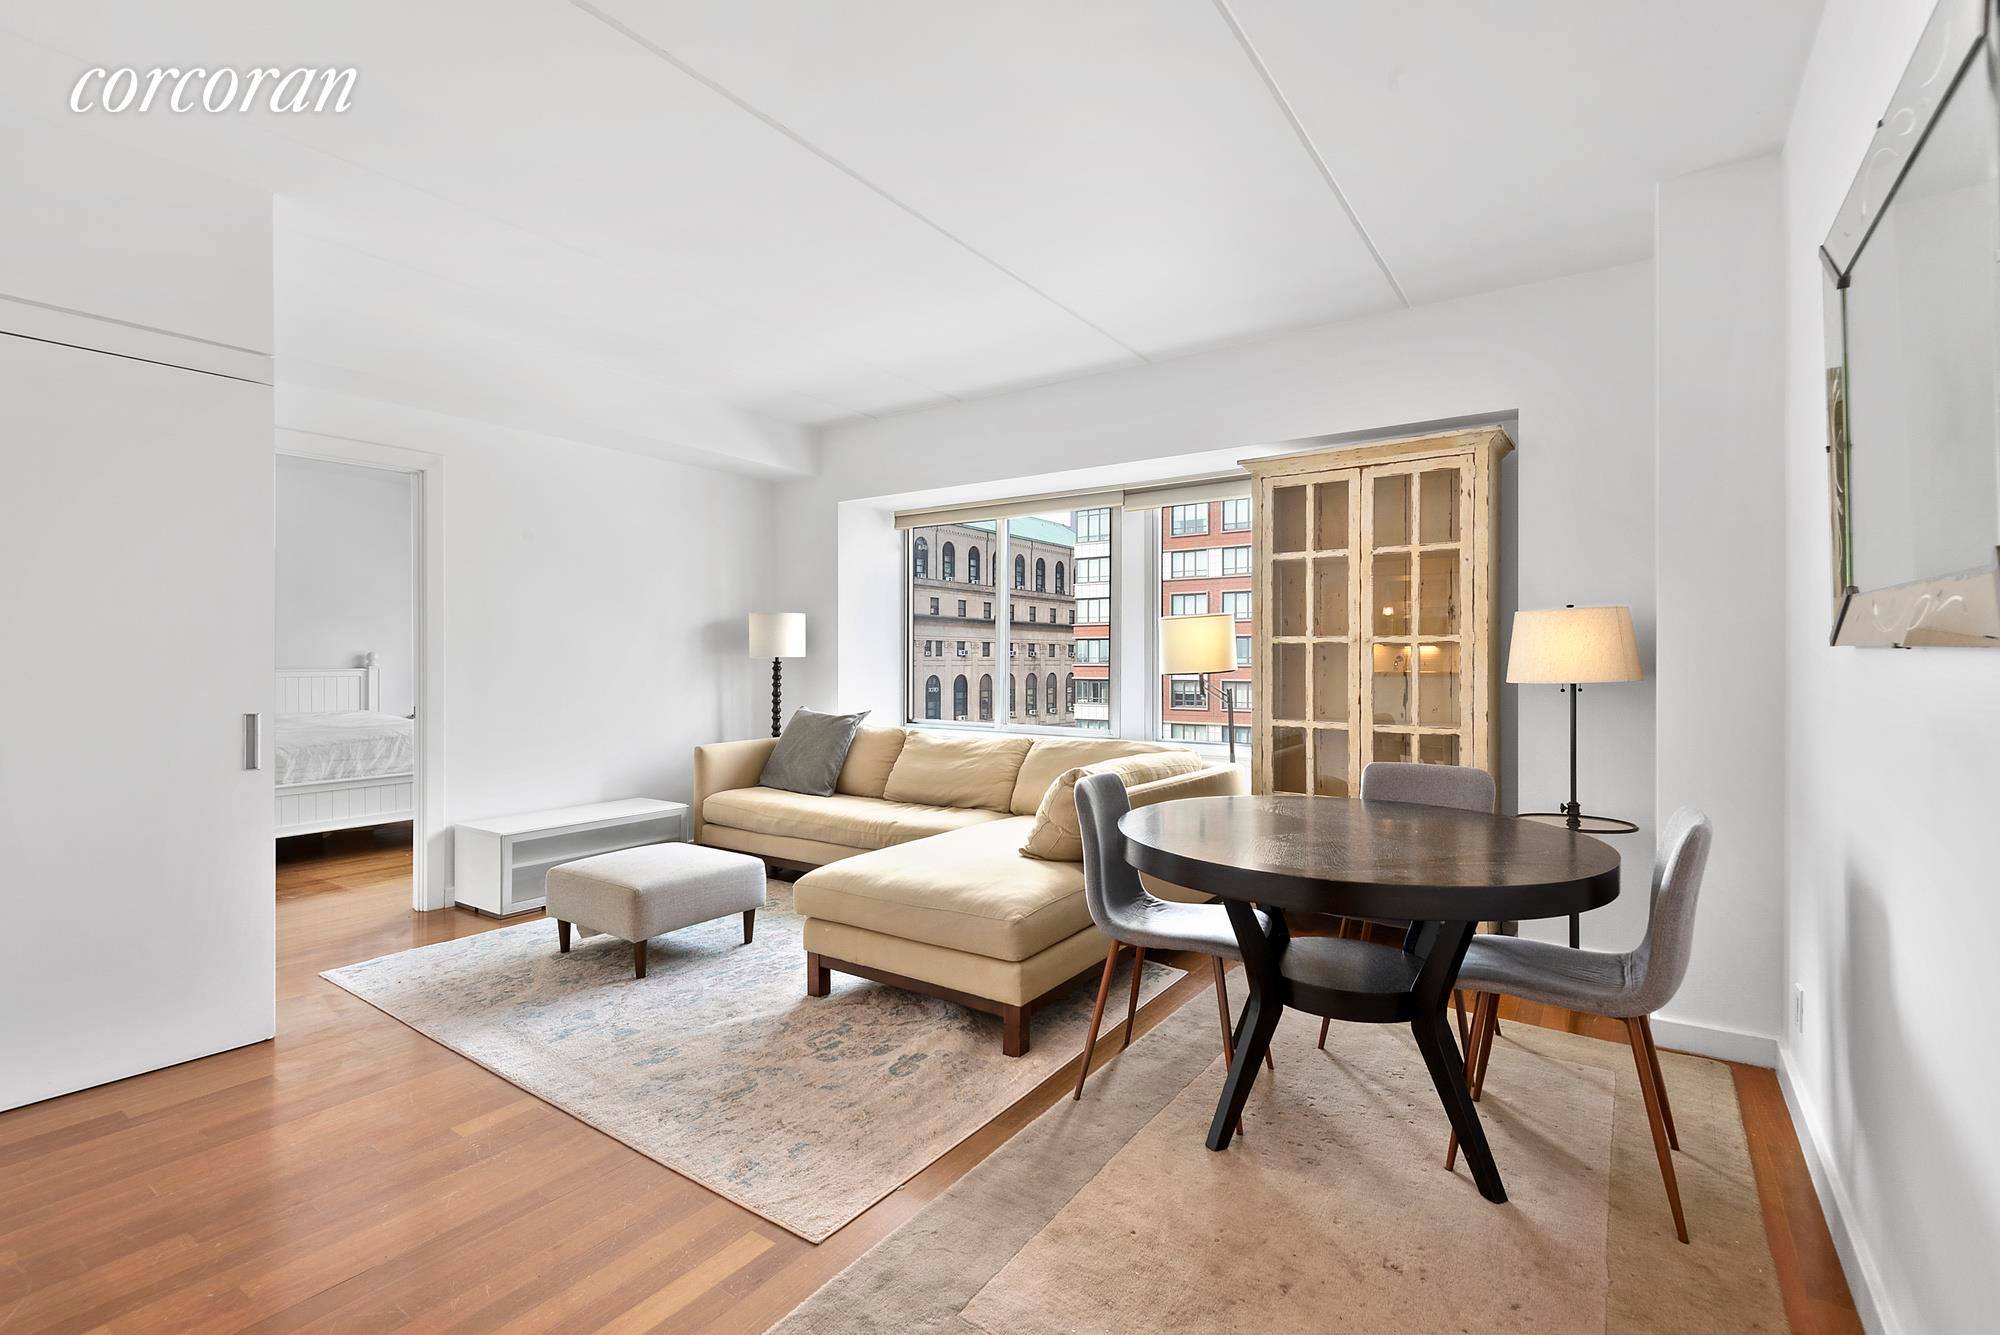 Available for Rent 87 Smith Street Unit 10E is a bright, modern Boerum Hill two bedroom two bathroom condo.